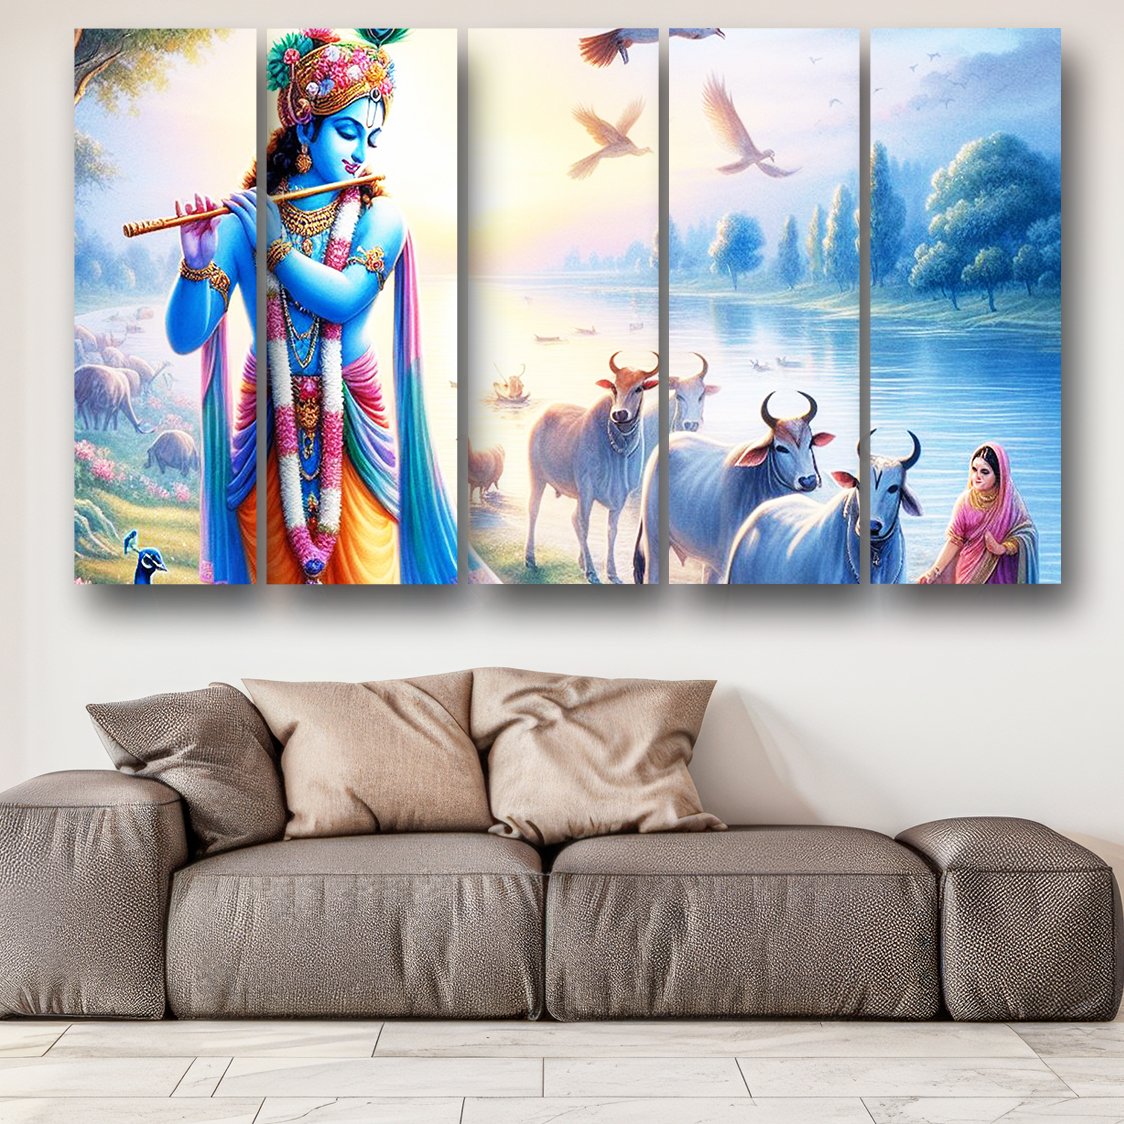 Casperme Lord Krishna Wall Painting For Living Room for Bedroom, Hotels & Office Decoration (48×30 inhes